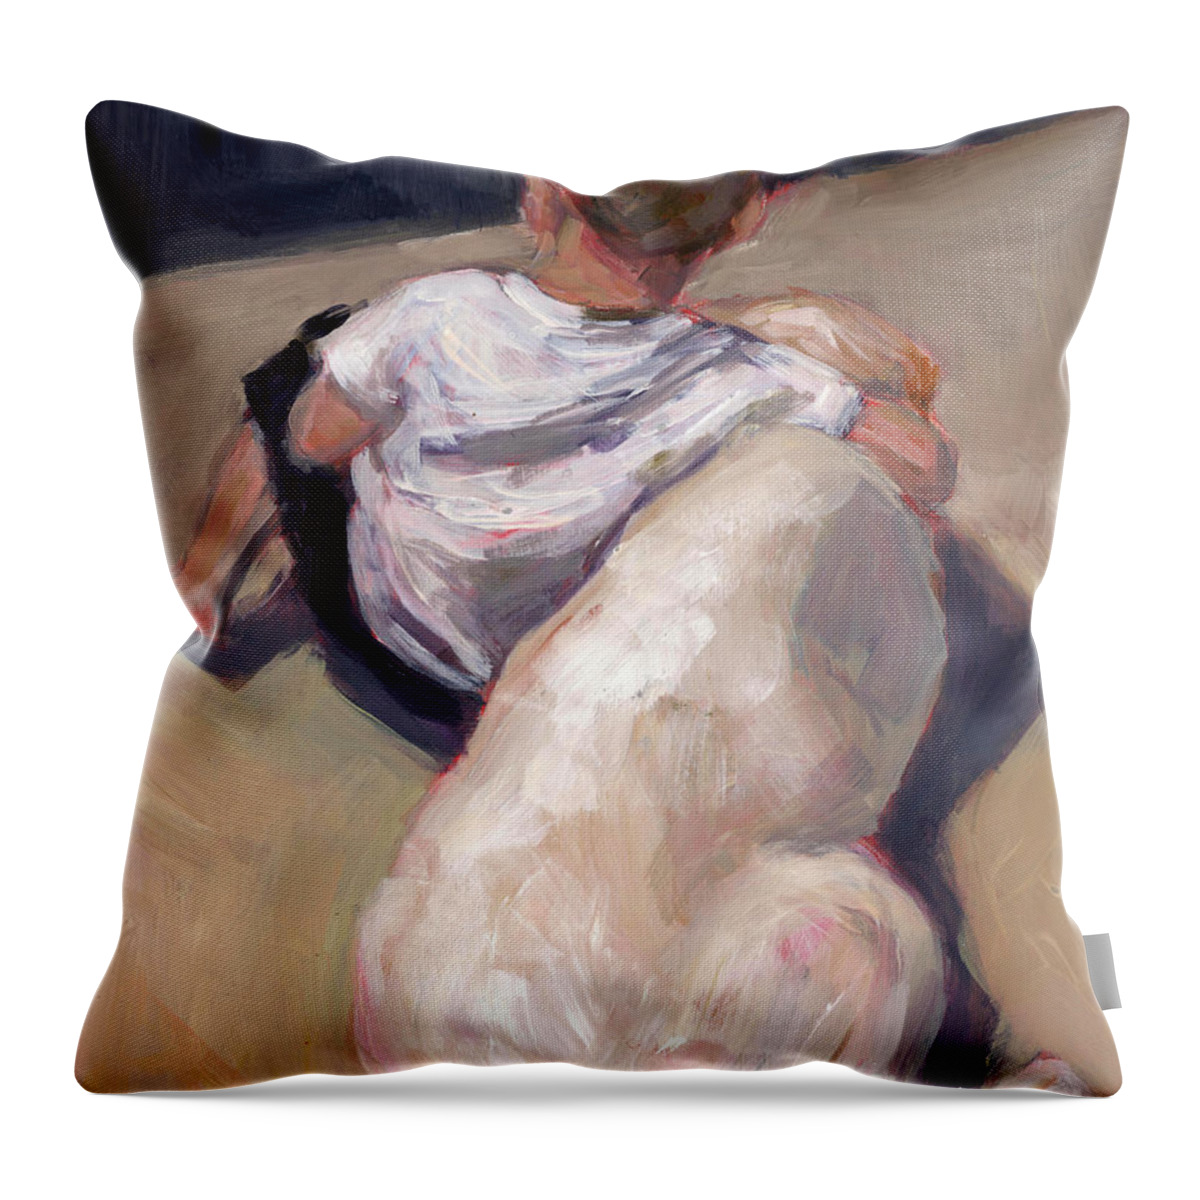  Throw Pillow featuring the painting My Beau by Molly Poole